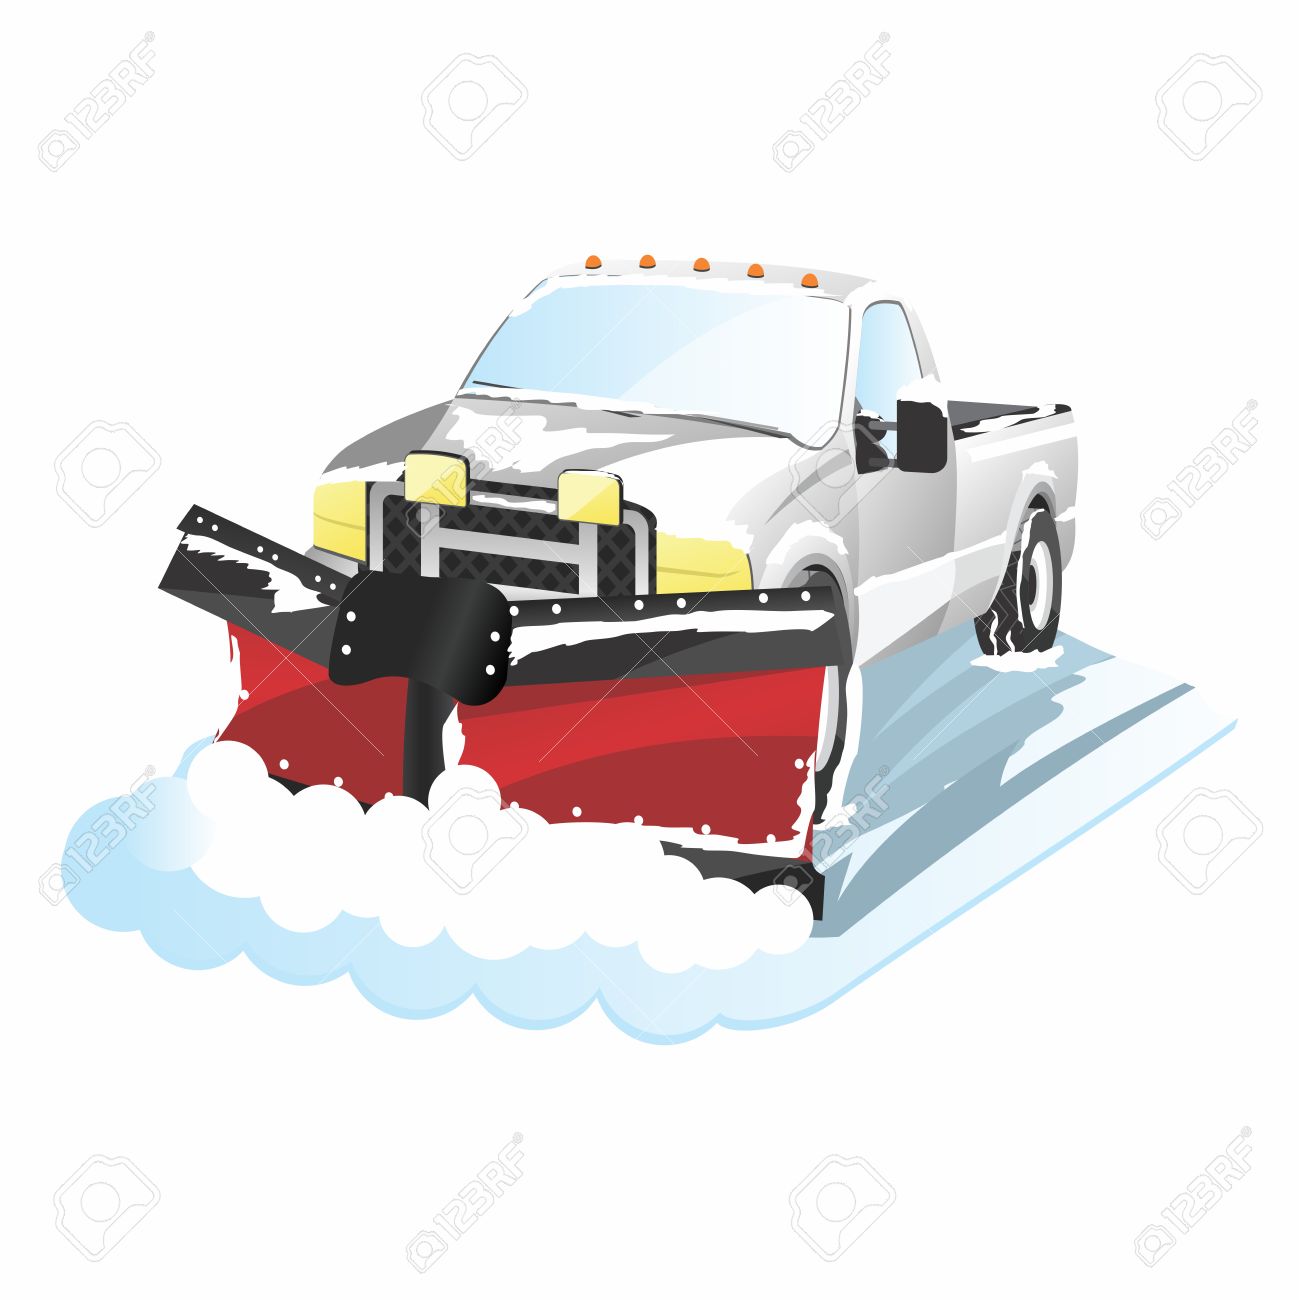 snow removal clipart free - photo #46